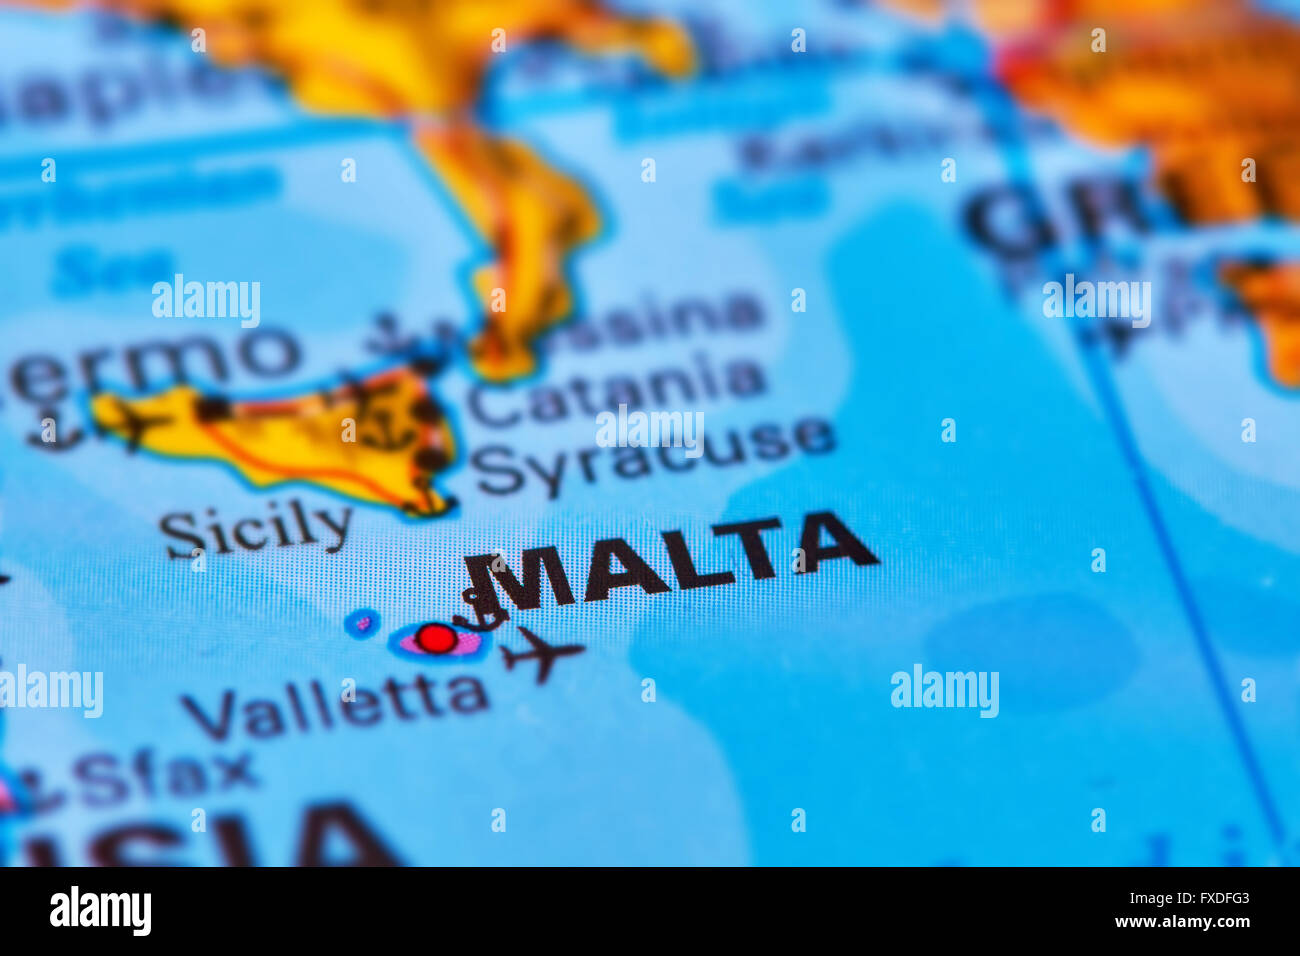 Malta Islands in Europe on the World Map Stock Photo